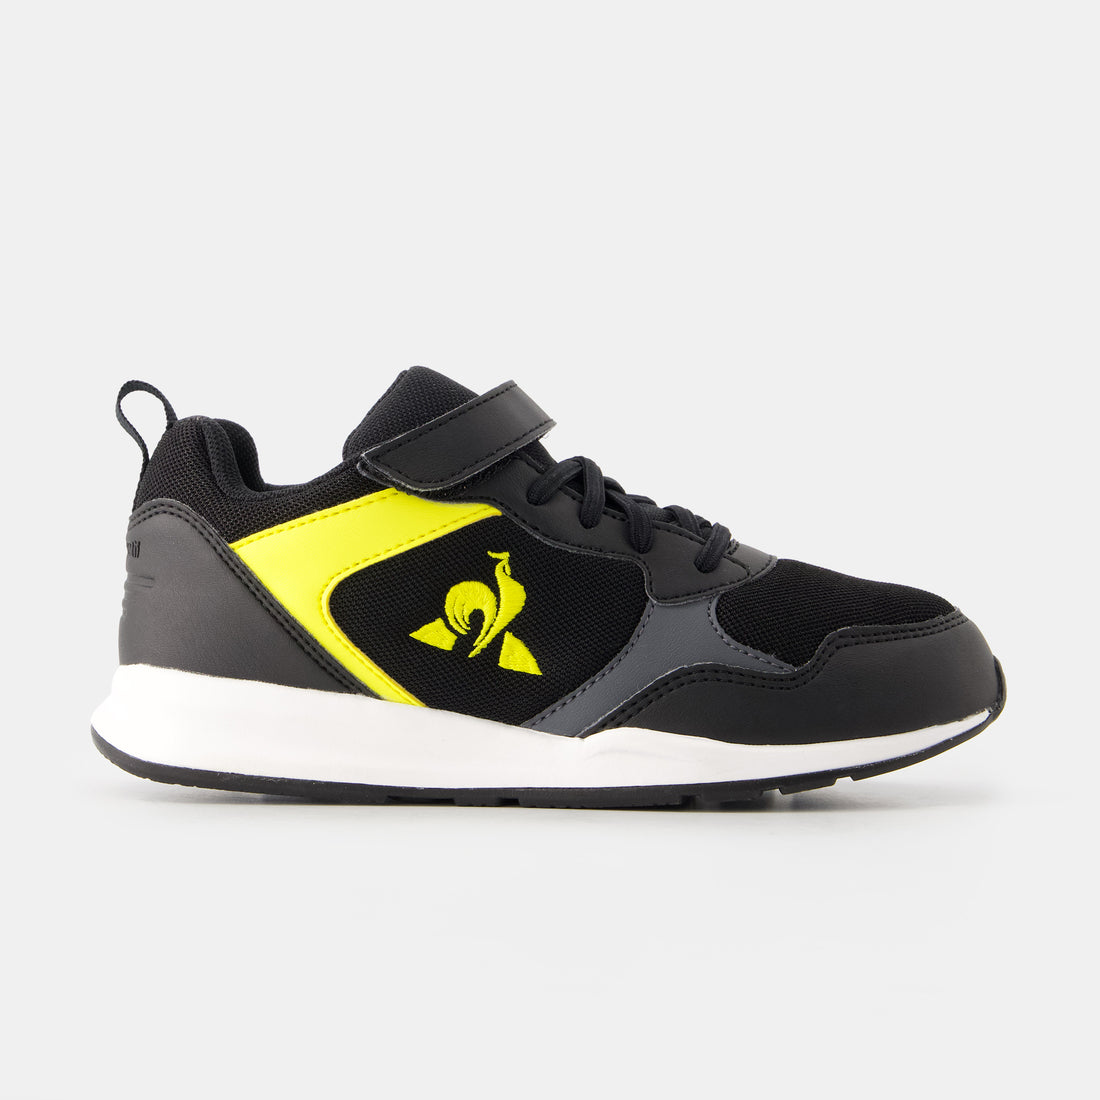 2410736-R500 PS black/ blazing yellow | Chaussures R500 PS Enfant